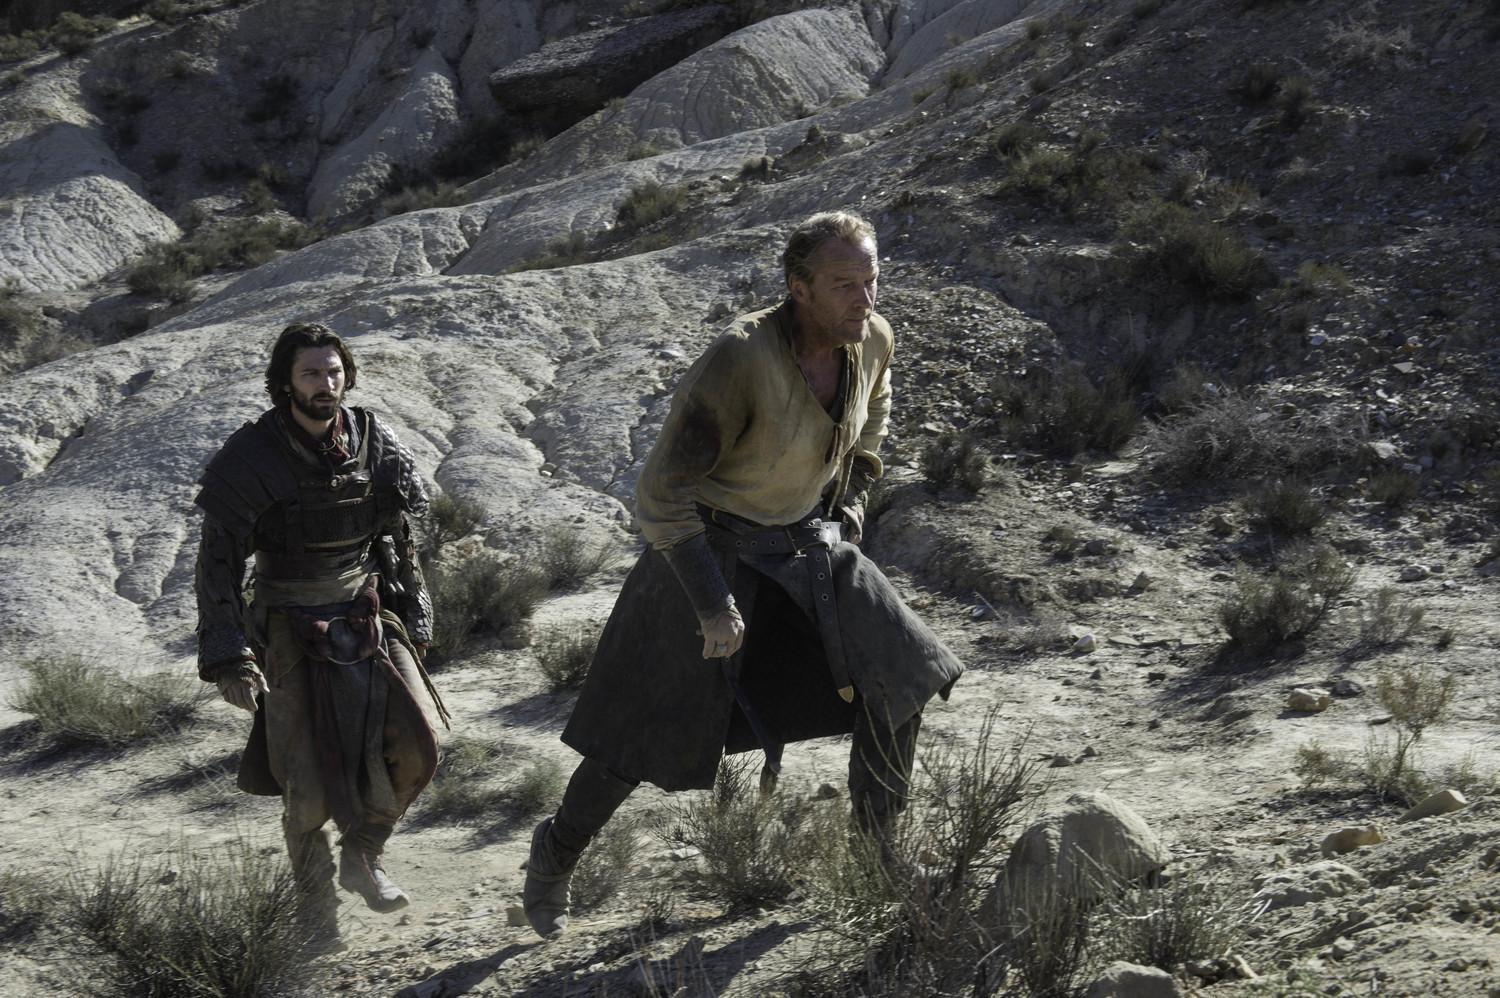 [Updated!] New photos from Game of Thrones Season 6, Episode 4 